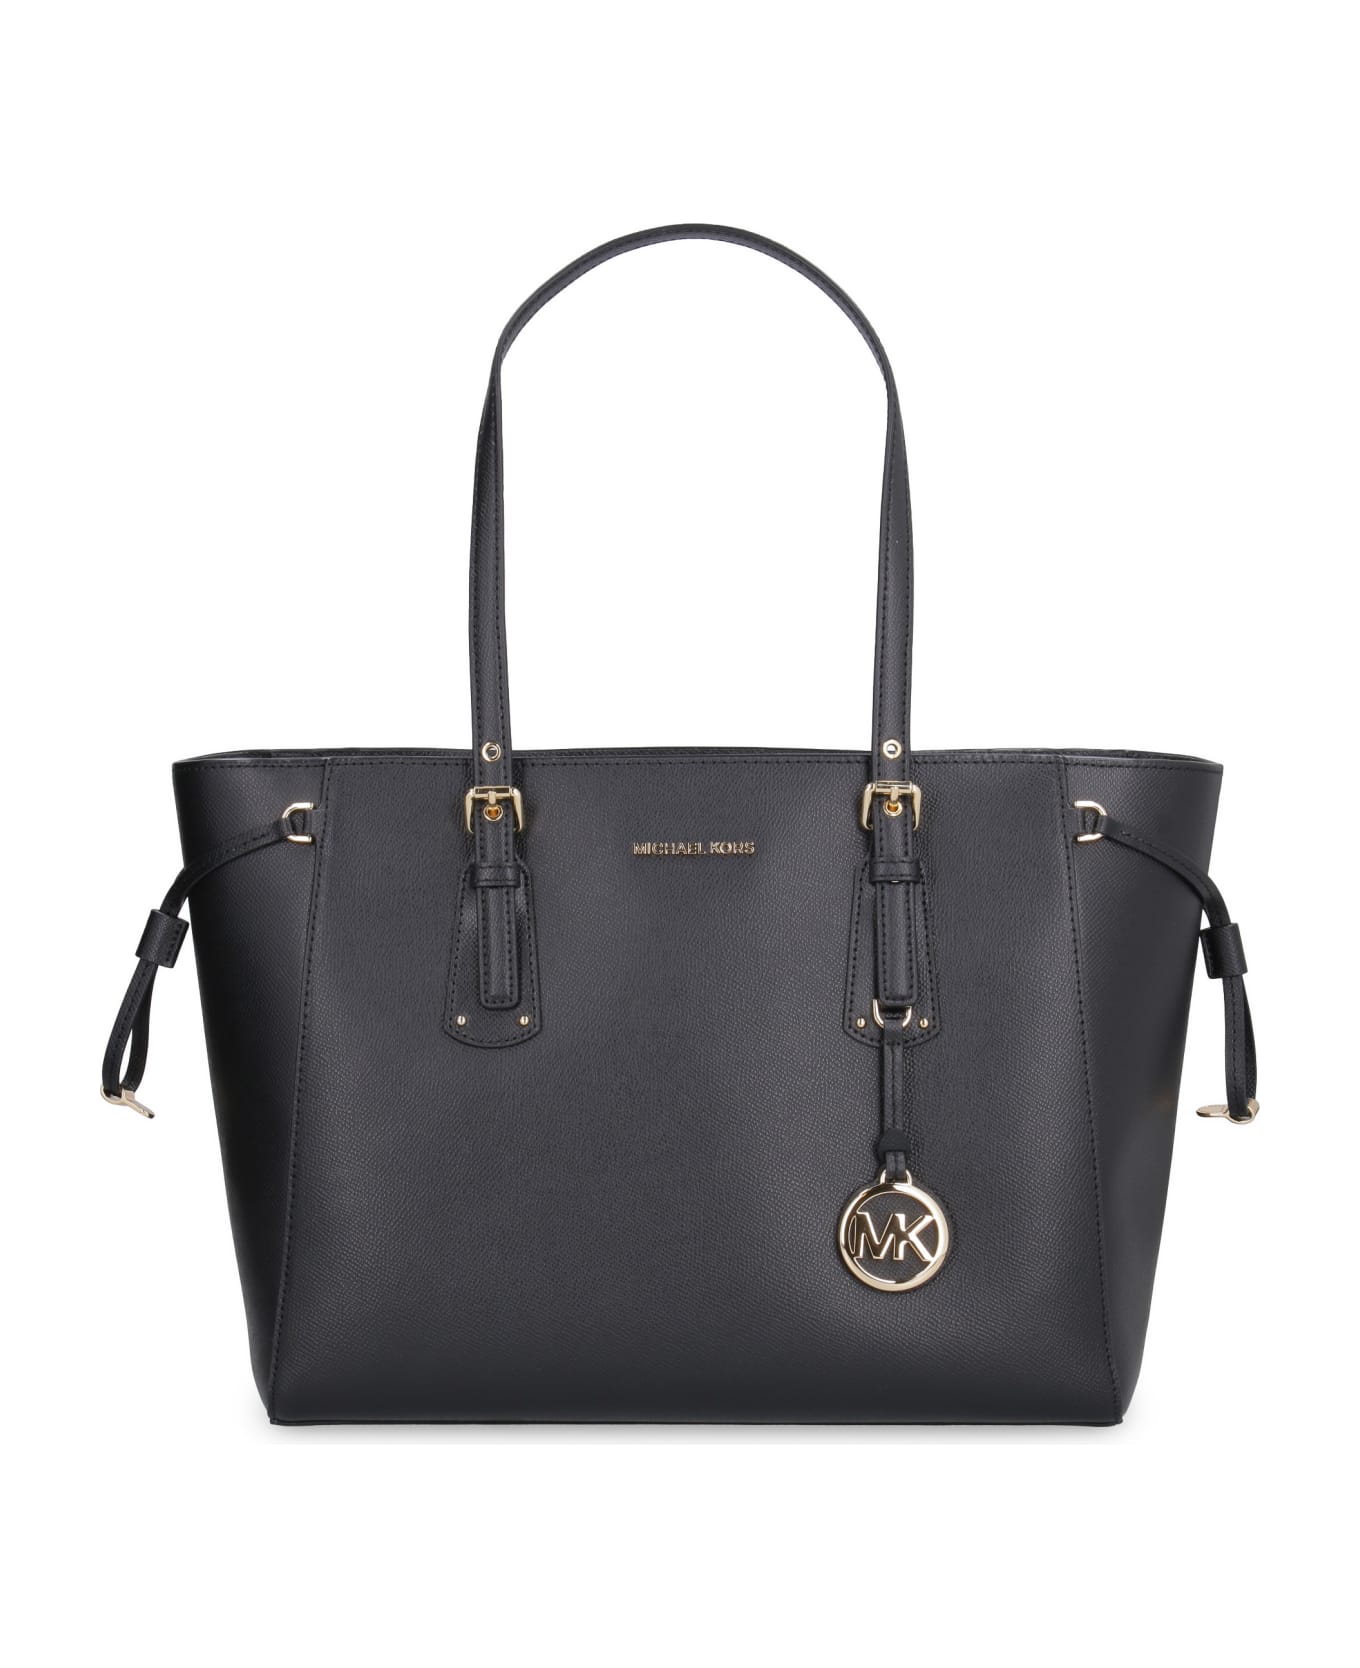 Michael Kors Voyager Leather Tote Bag | italist, ALWAYS LIKE A SALE